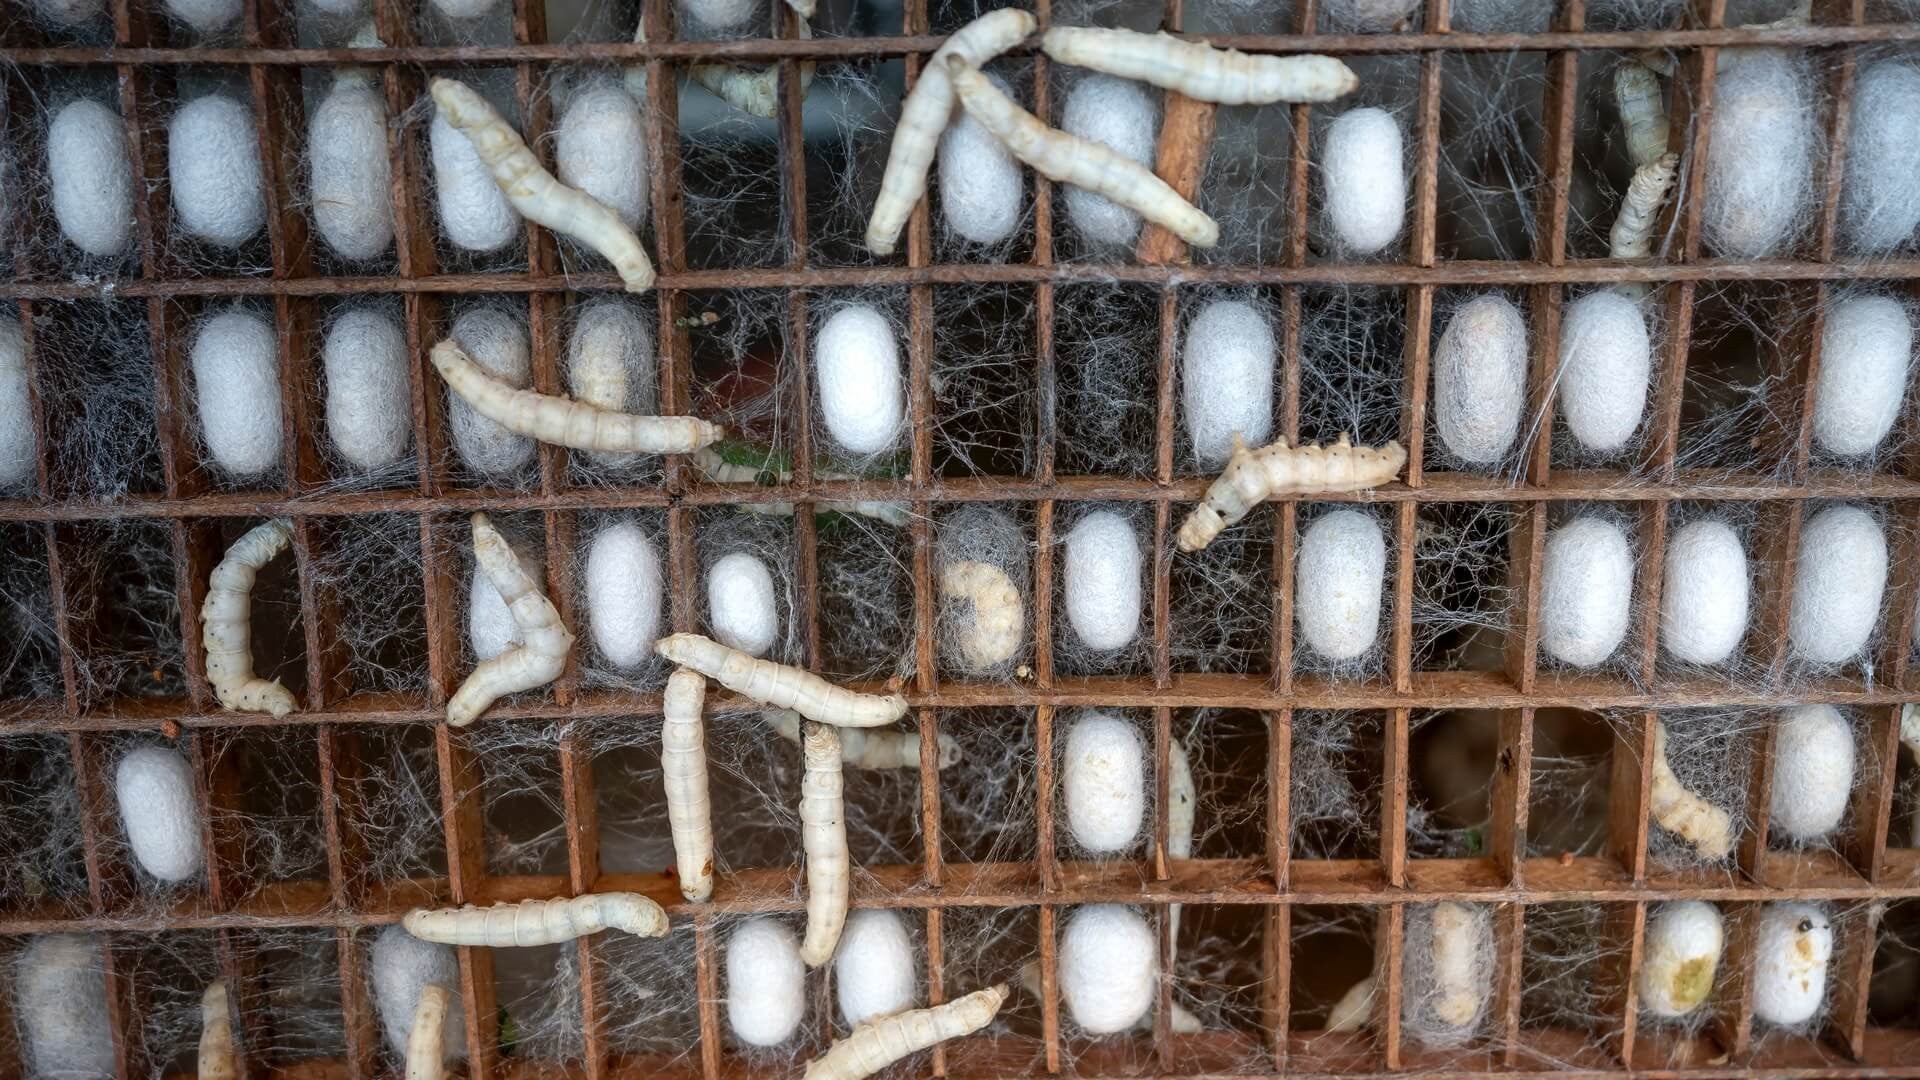  mulberry silkworms